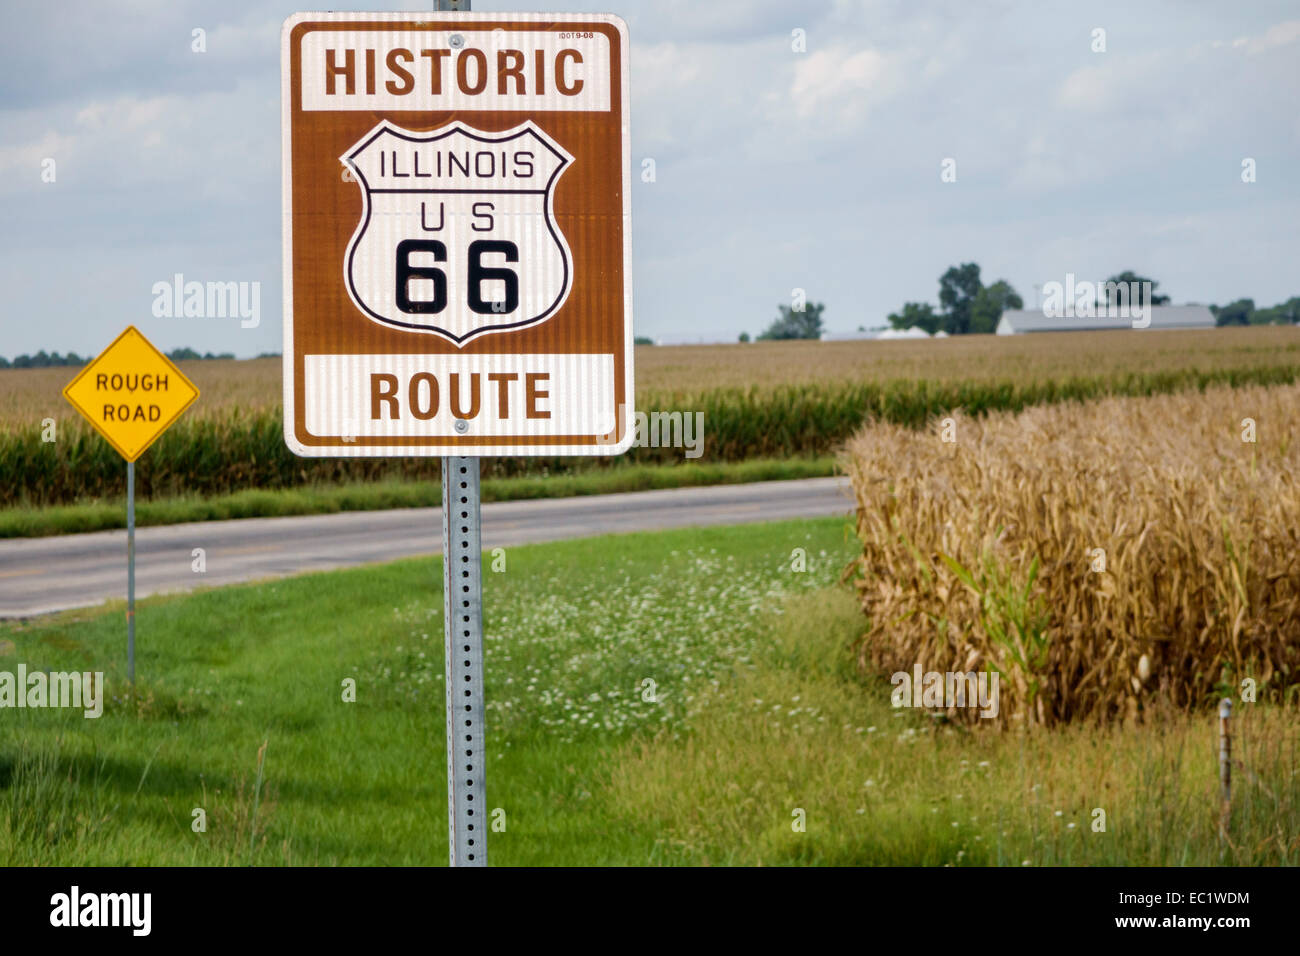 Illinois Waggoner,historic highway Route 66,sign,corn,cornfields,rural,IL140902092 Stock Photo